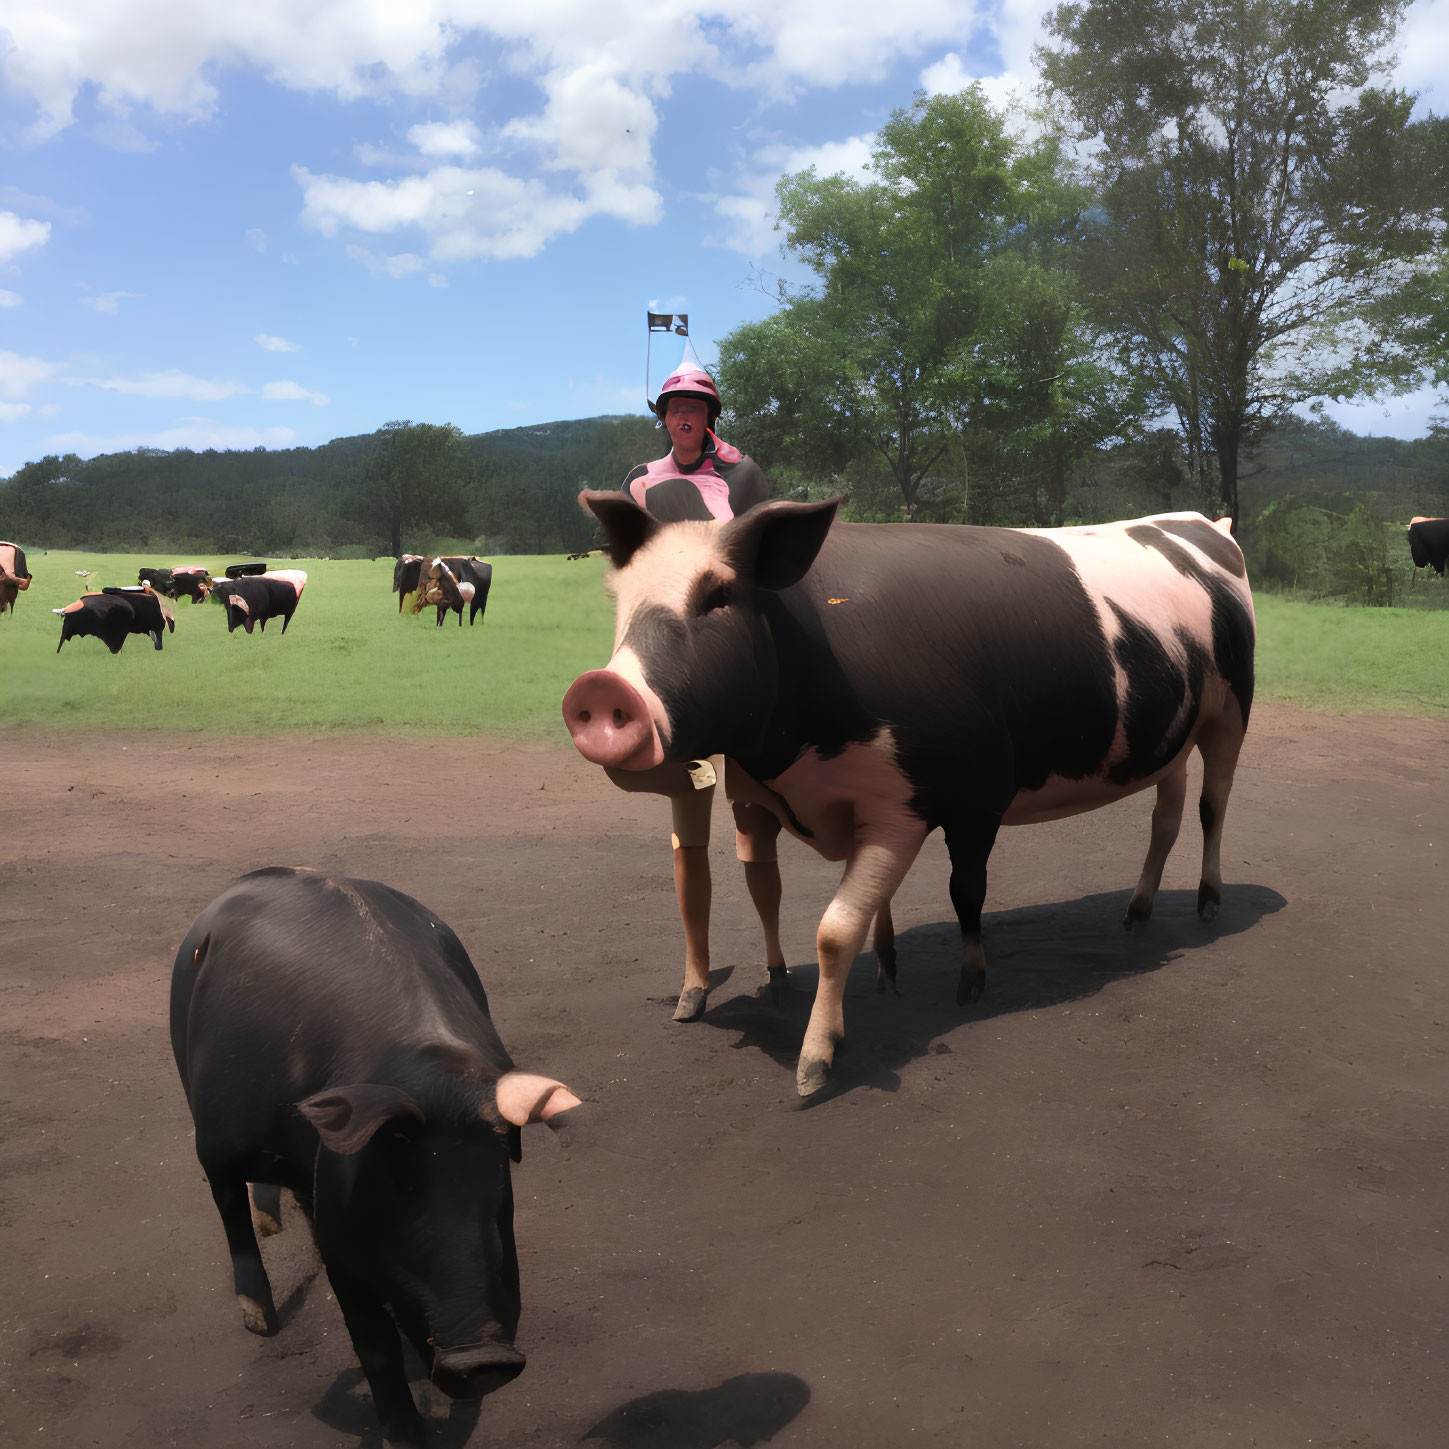 Child in pink helmet rides pig in field with cows under clear sky